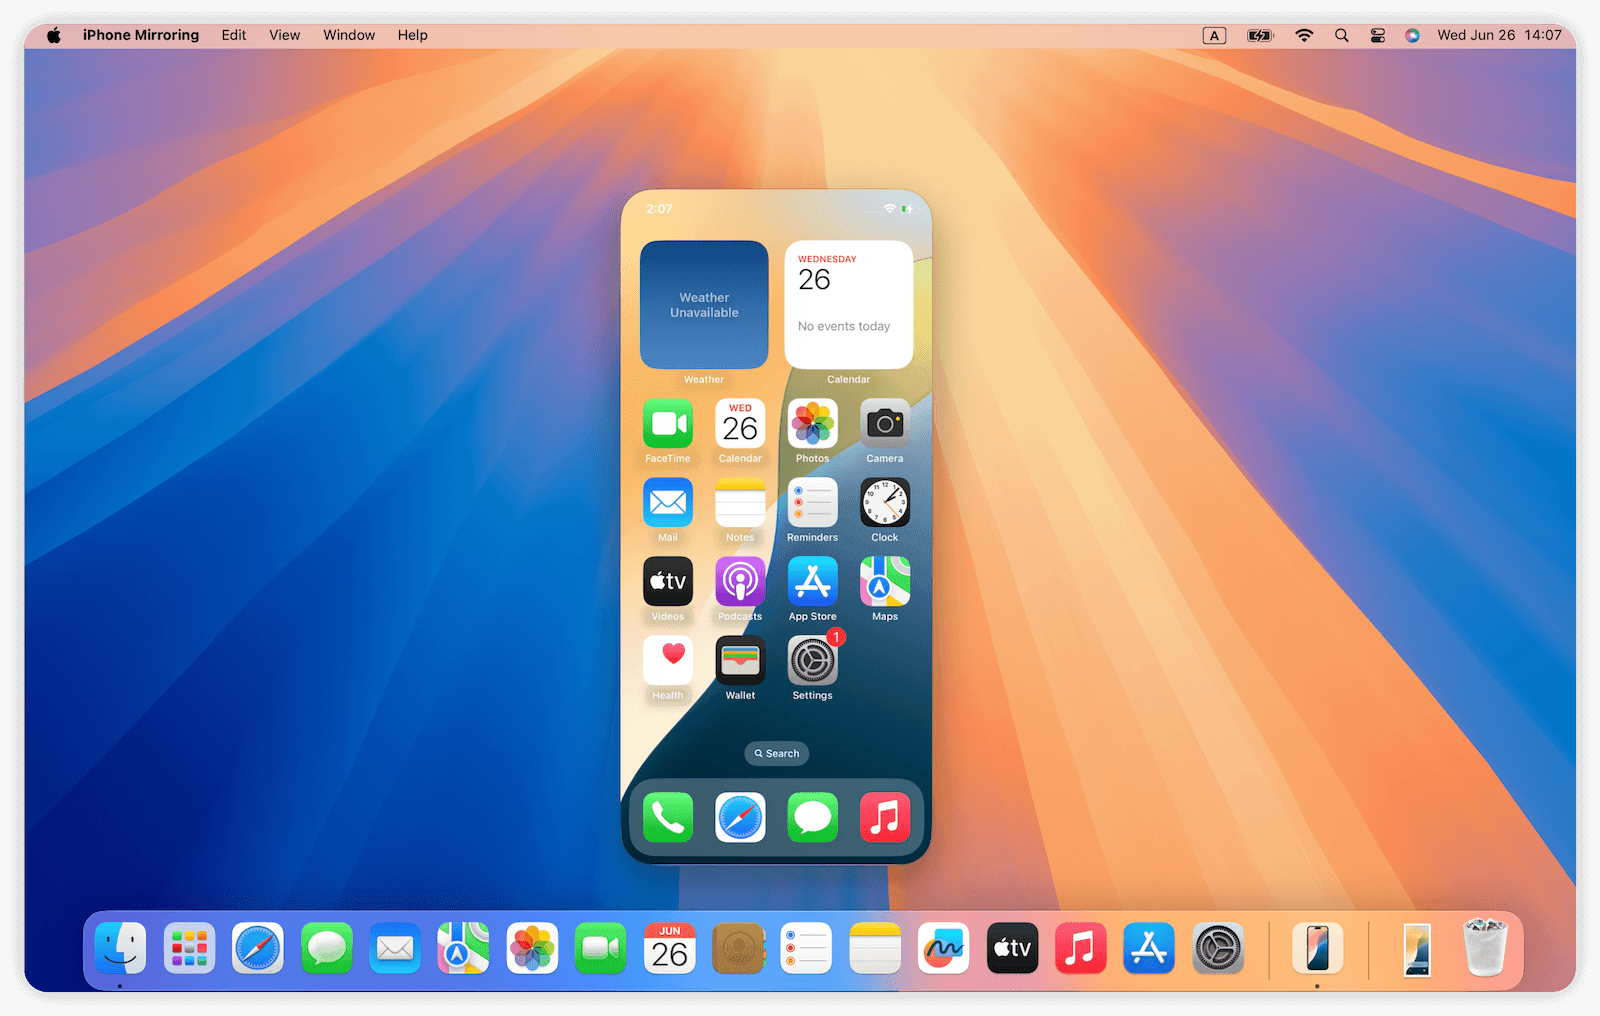 View and Control Your iPhone on macOS Sequoia